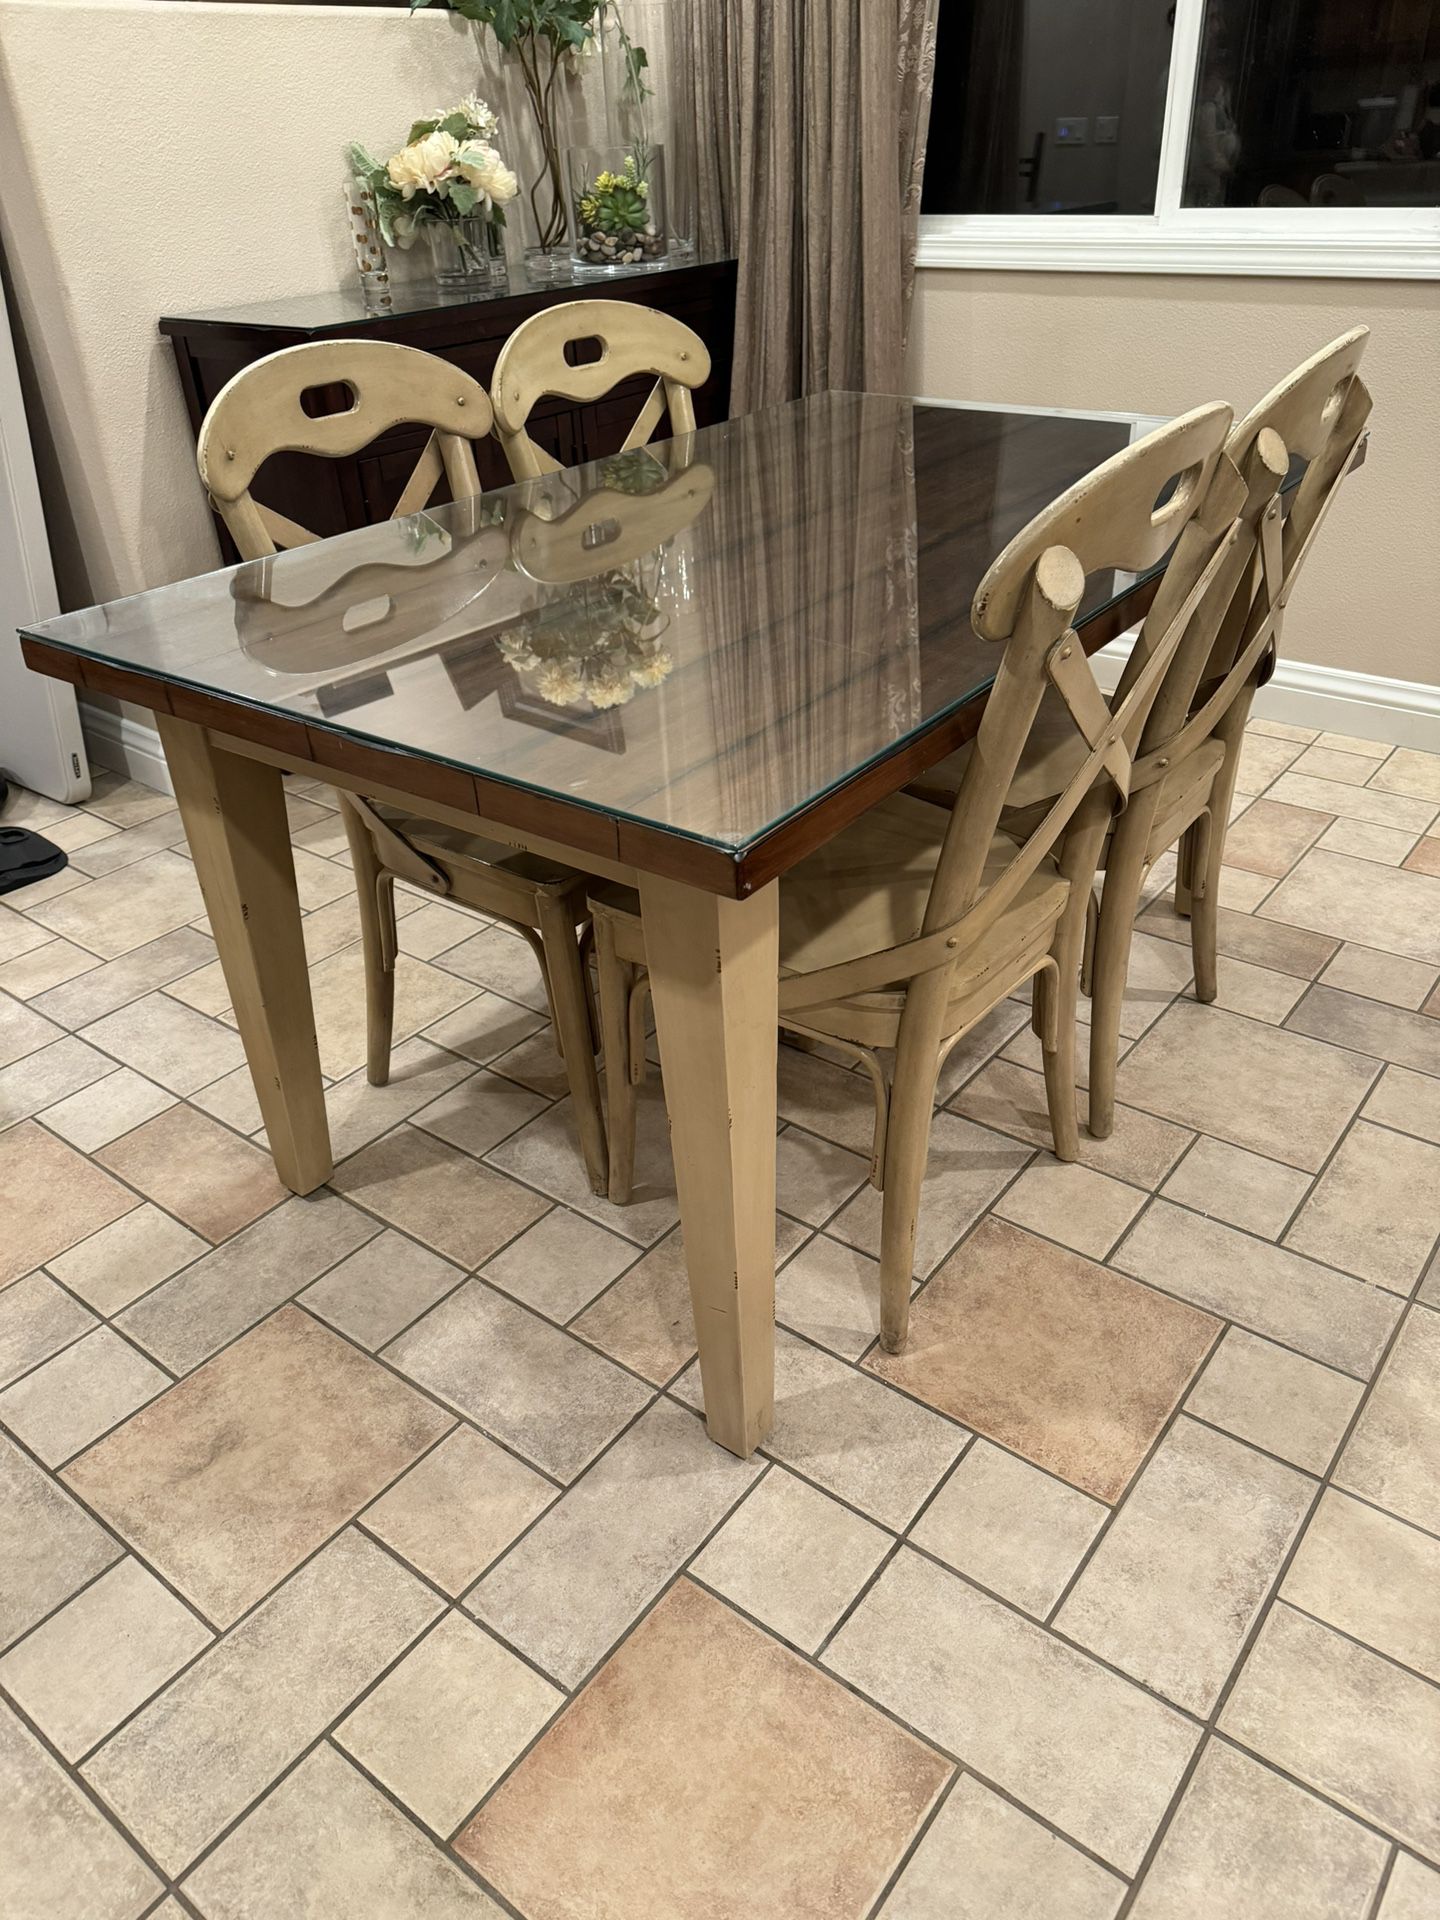 Pottery Barn Breakfast Table With Chairs